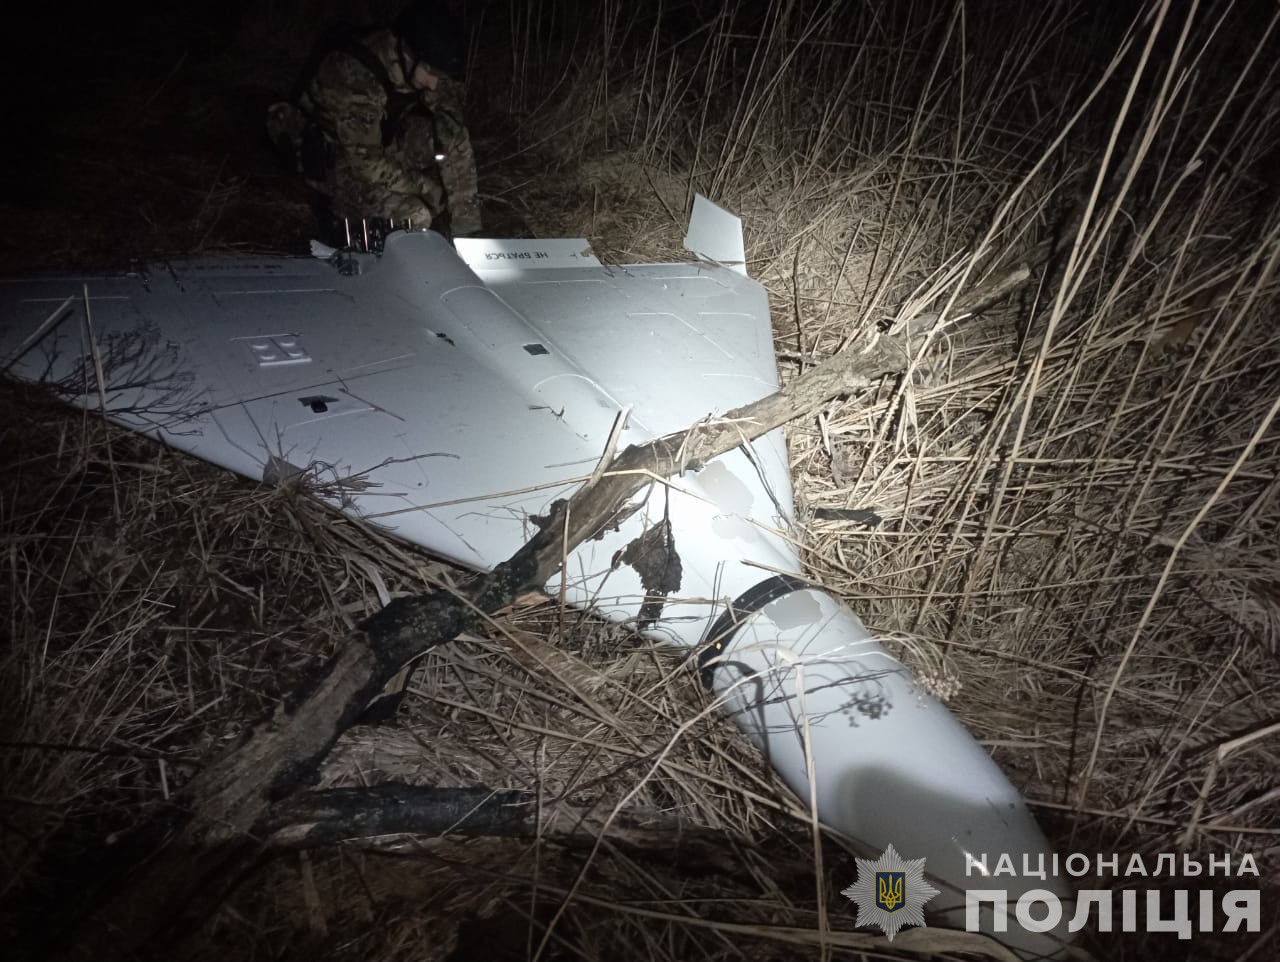 russian Shahed drone Defense Express Ukrainian Forces Capture Intact russian Drone Targeting Civilians (Video)